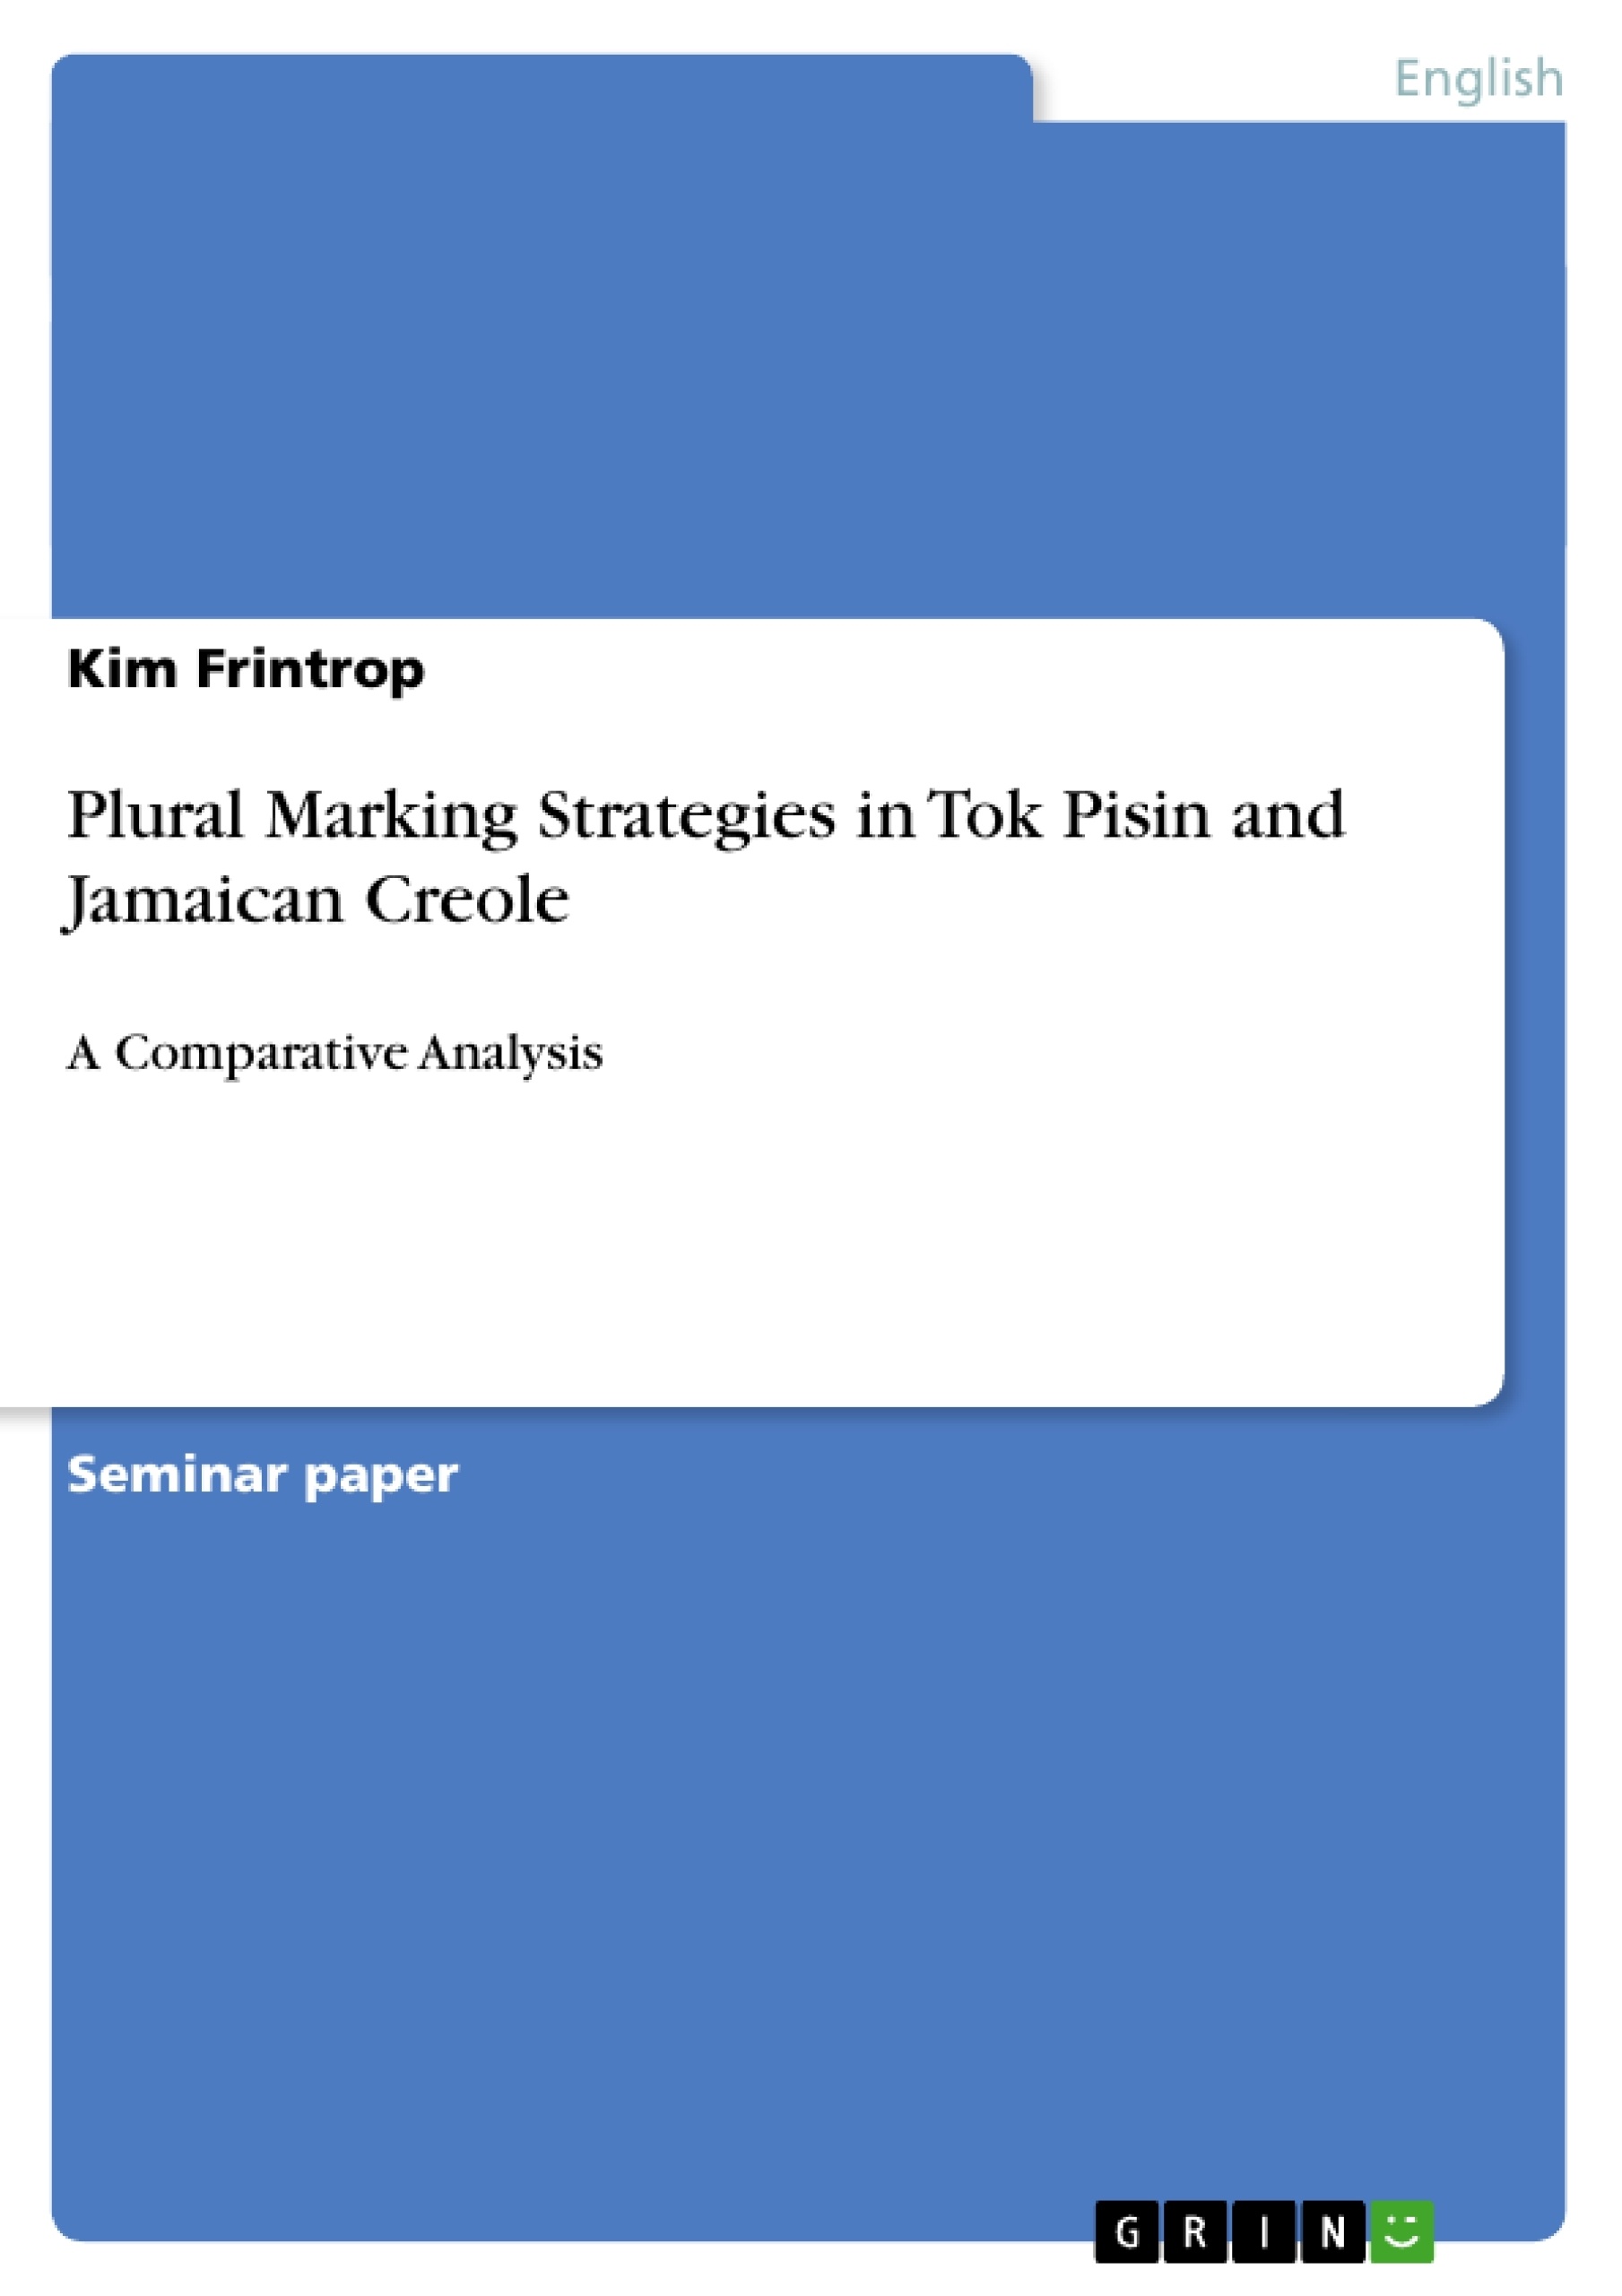 Title: Plural Marking Strategies in Tok Pisin and Jamaican Creole